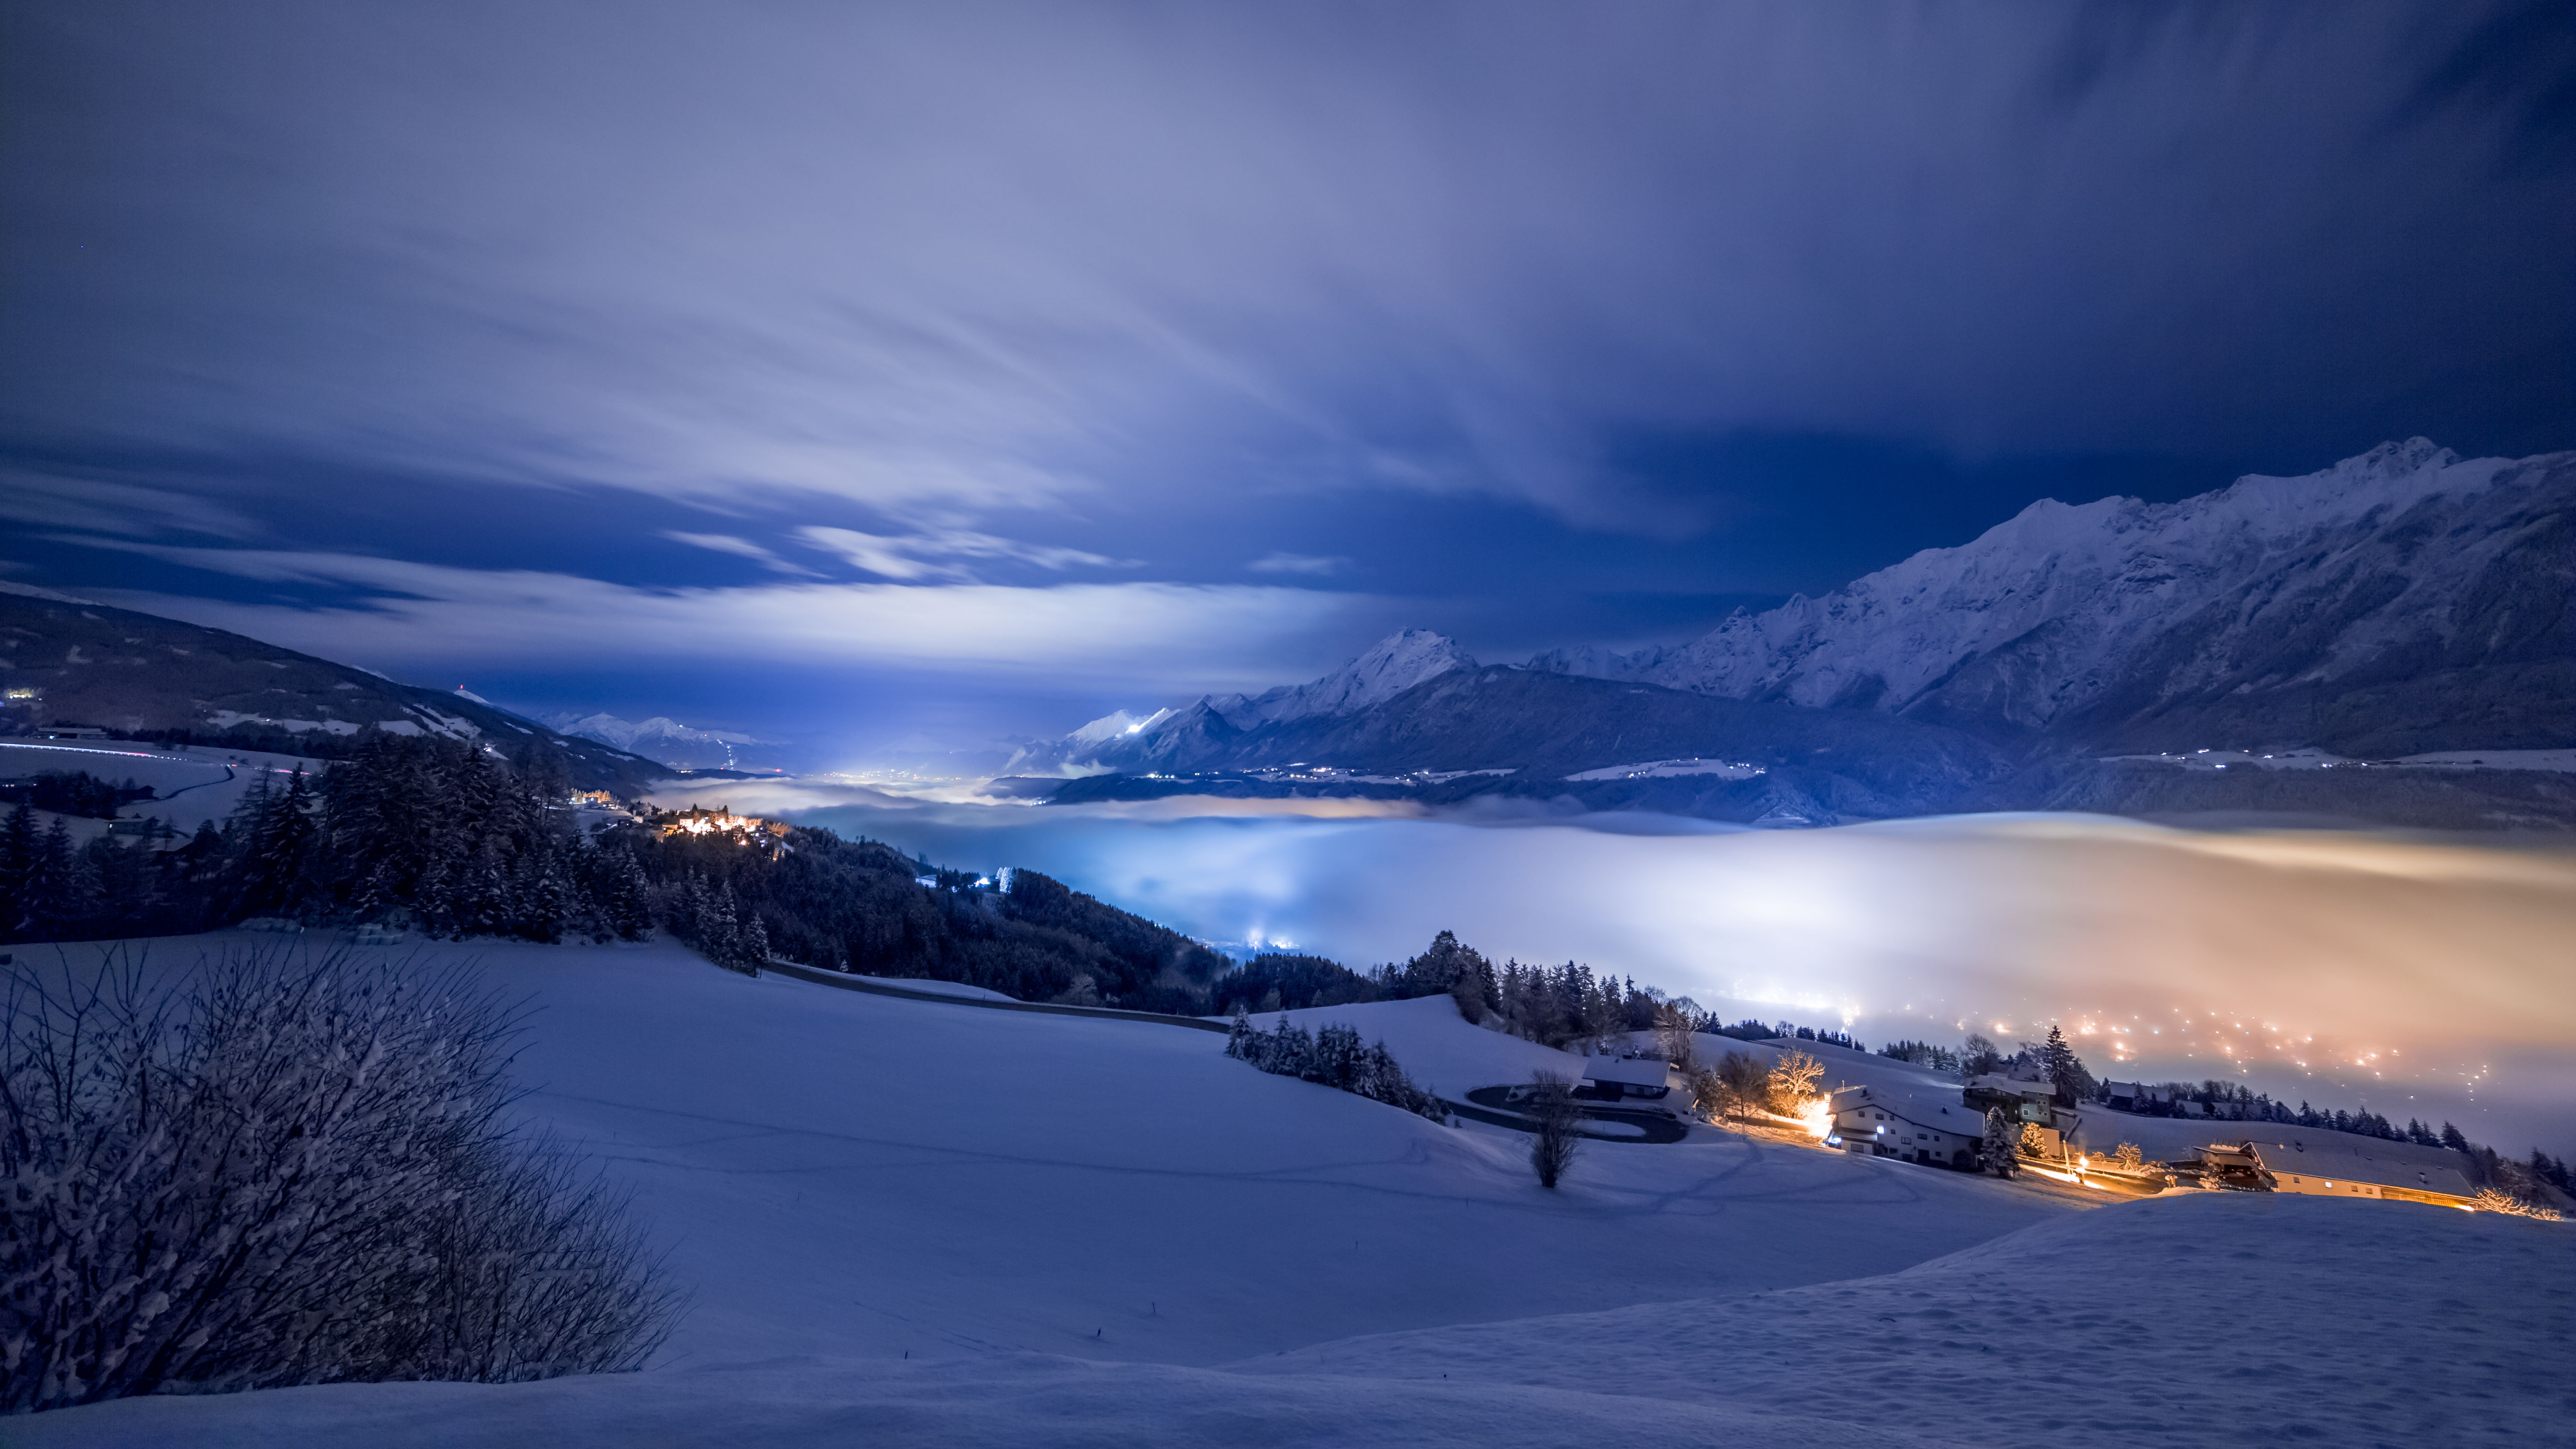 Winter Night in the Mountains HD Wallpaper